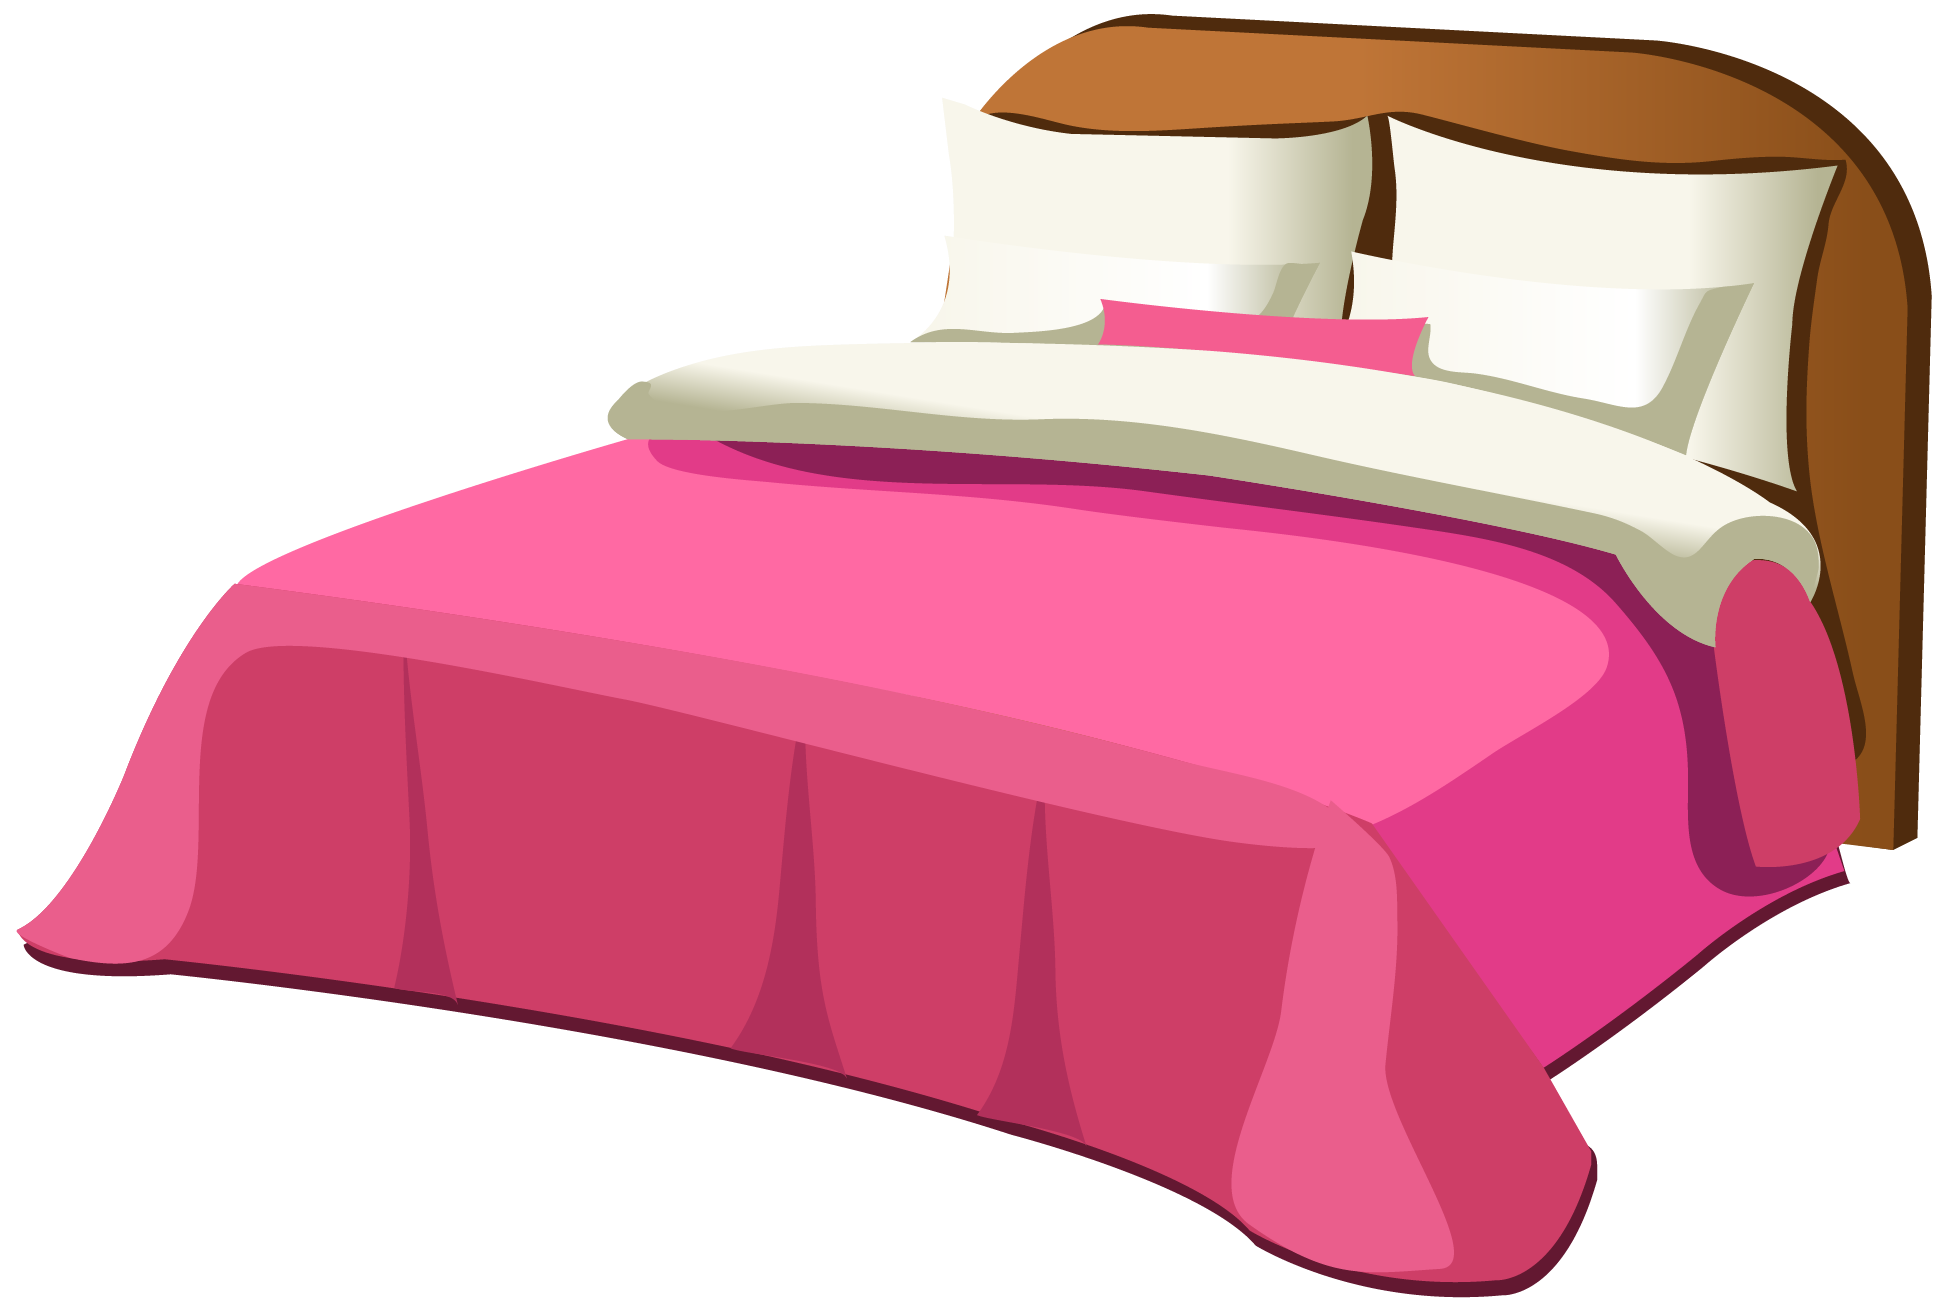 66246-kids-for-puzzle-bed-beds-vector-android.png